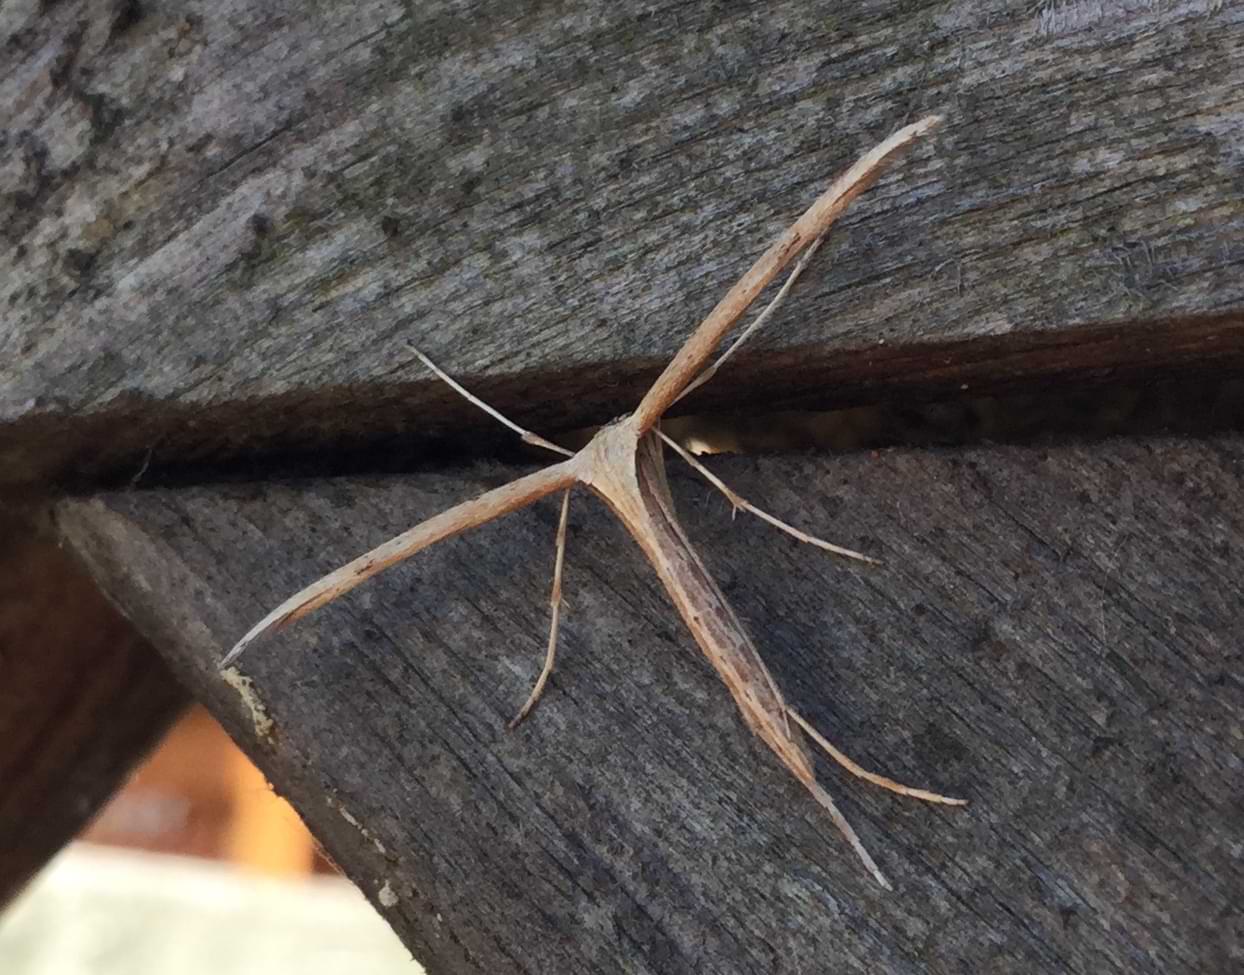 A dull brown moth on a beam of wood. It is very skinny looking.